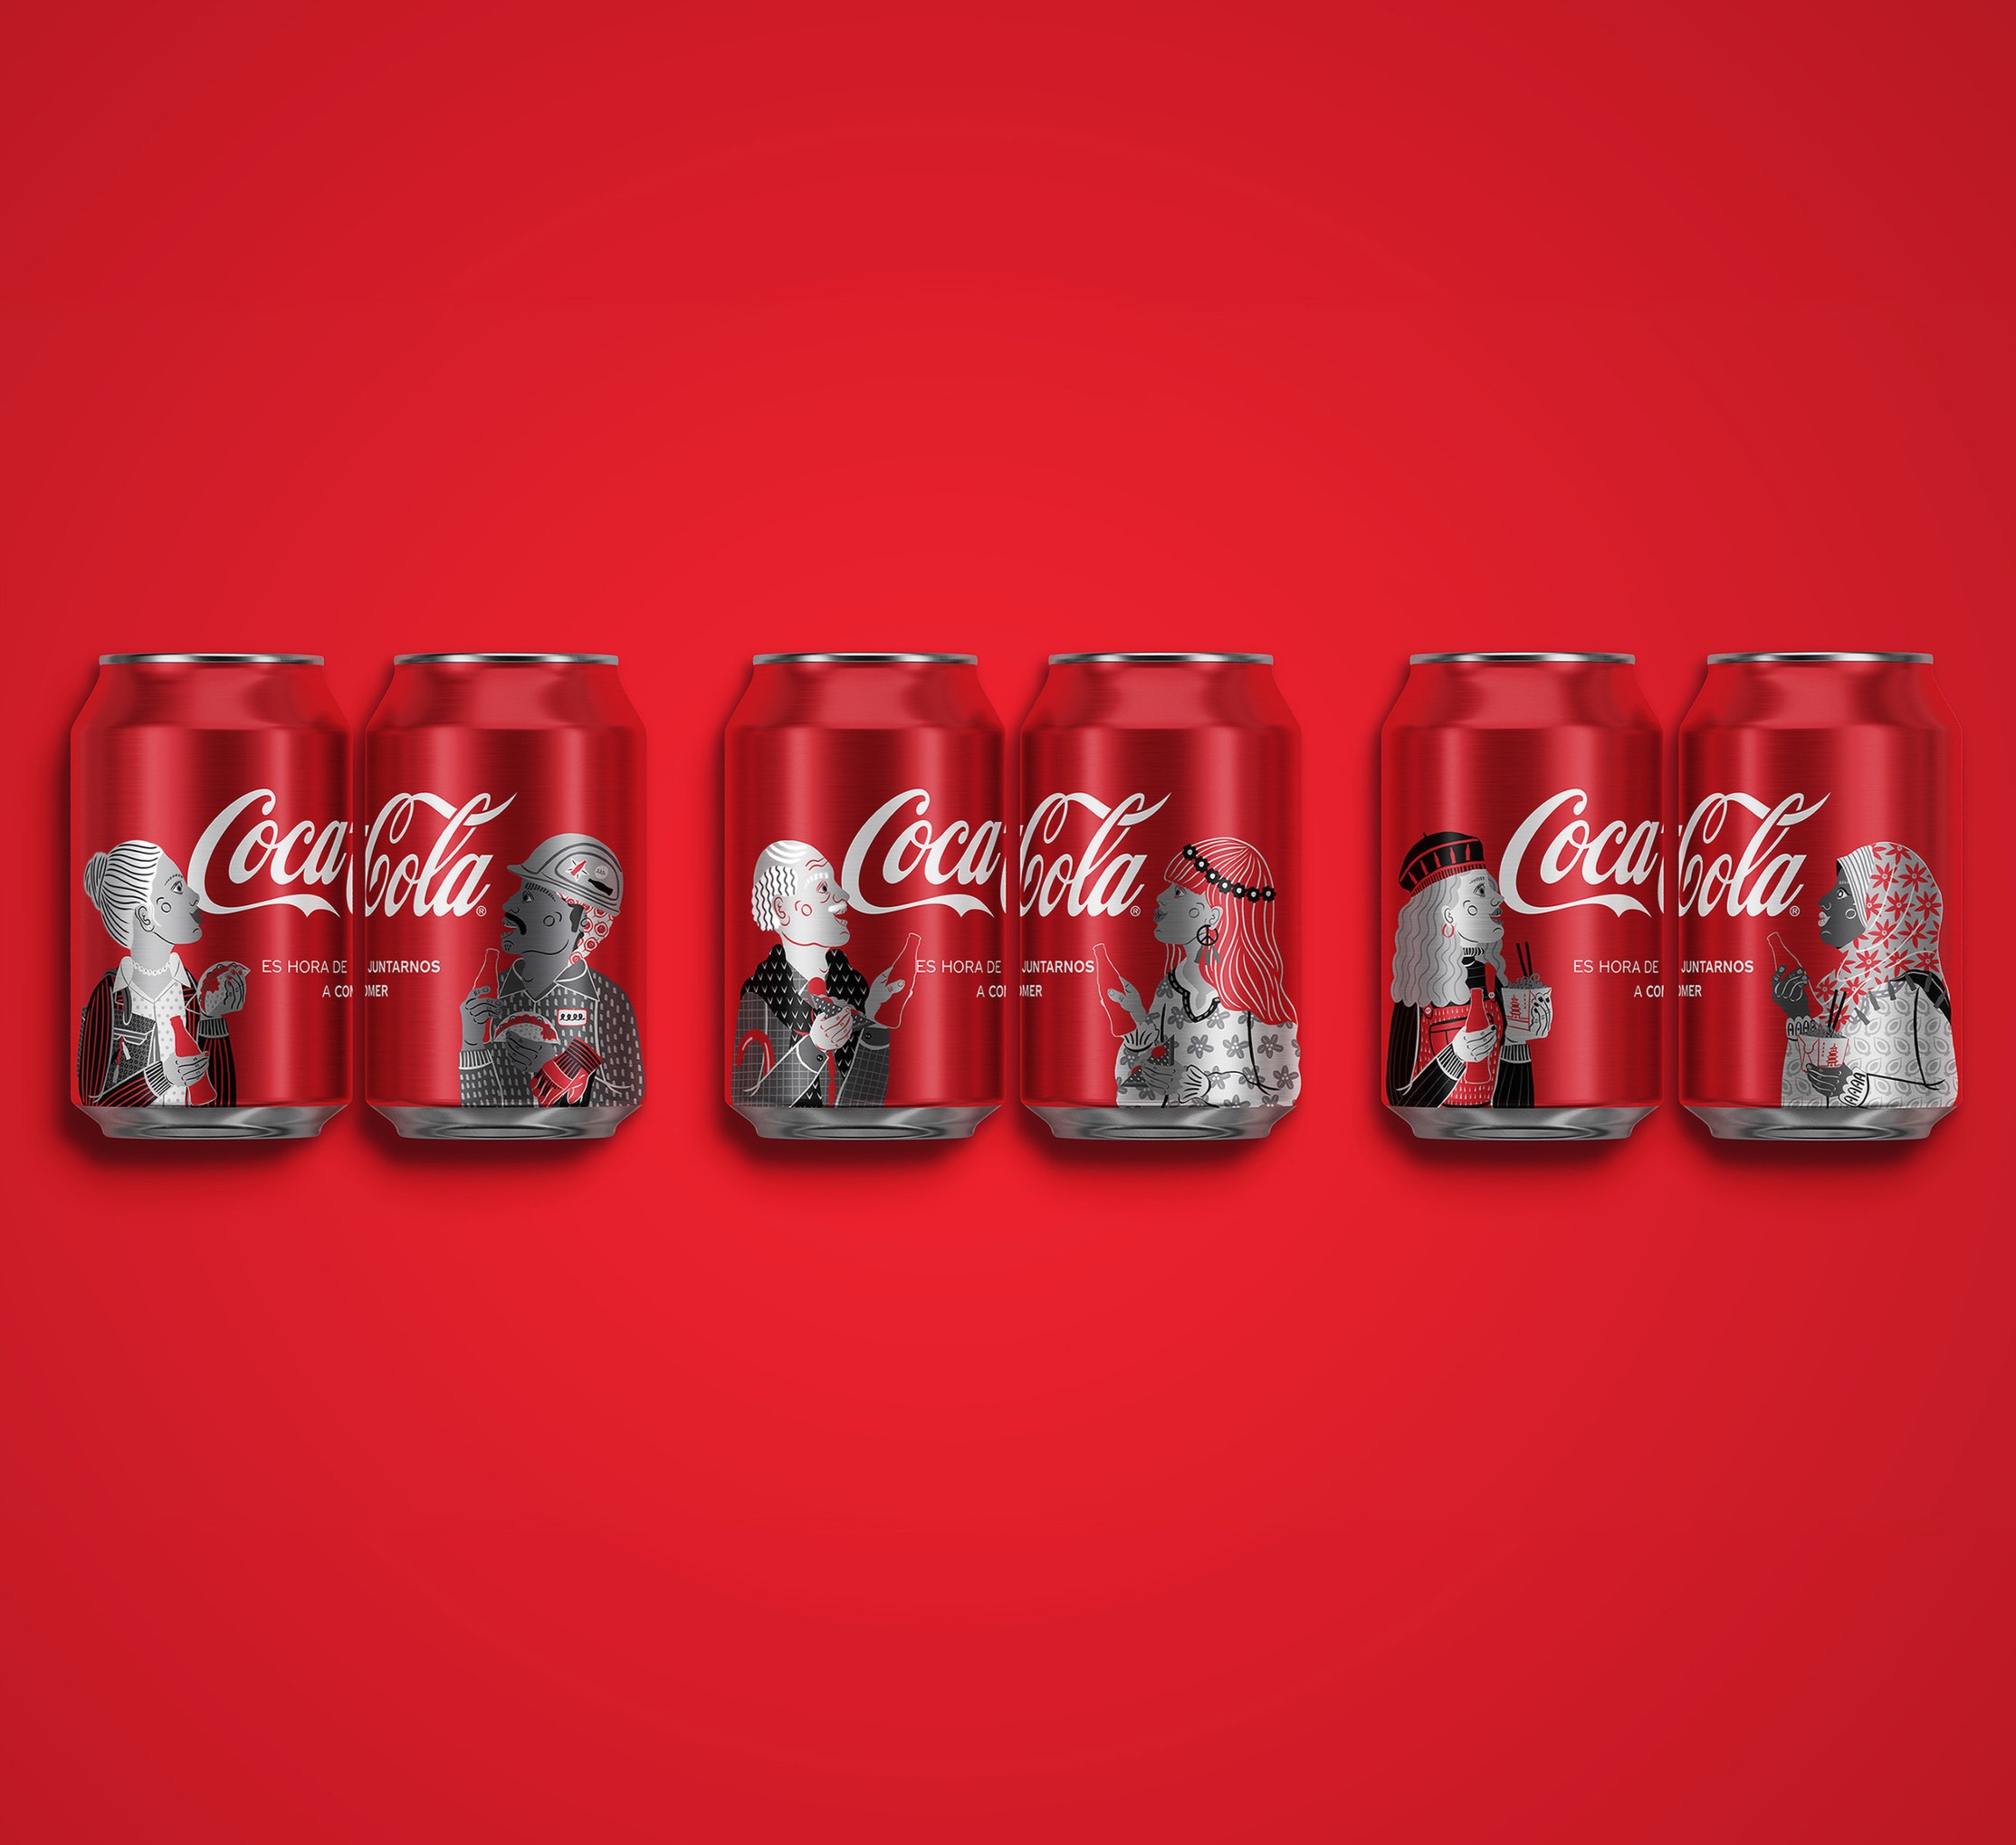 Geometry Creates Global Packaging for the Campaign “It’s Time to Eat Together” for Coca-Cola